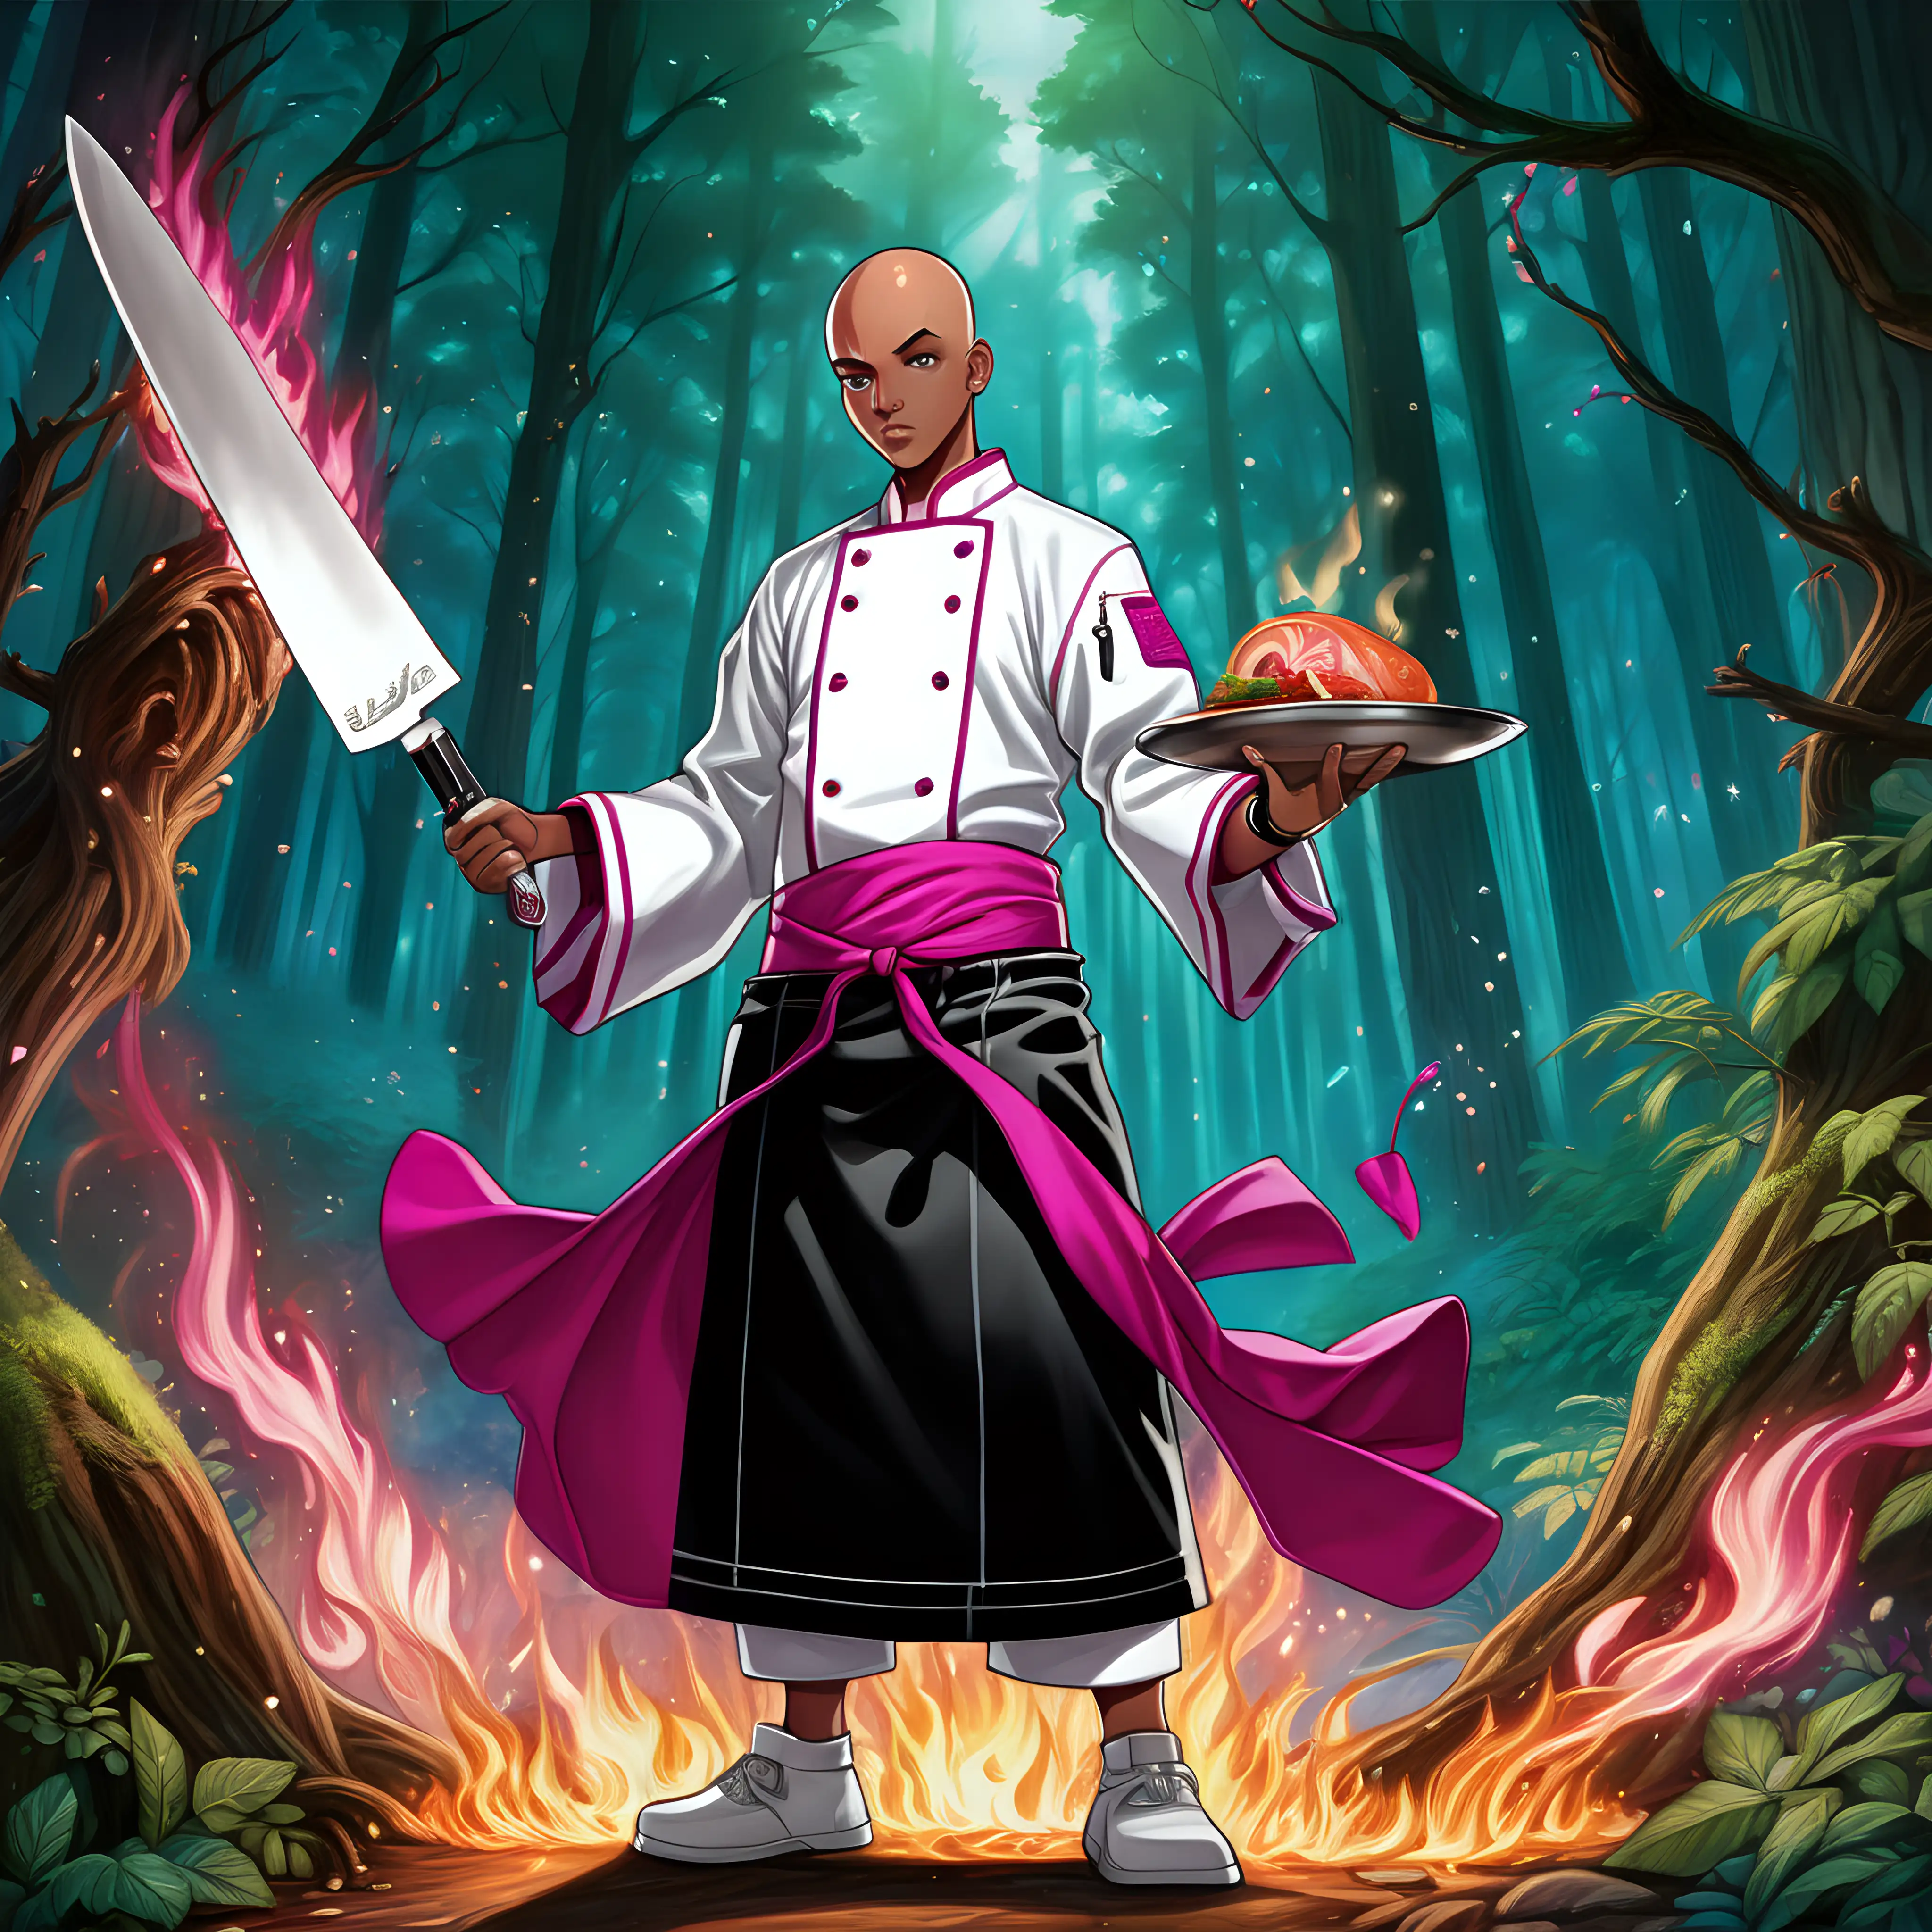 Magical Forest Chef Young Bald Black Man in Manhwa Art Style Cooking with Magic